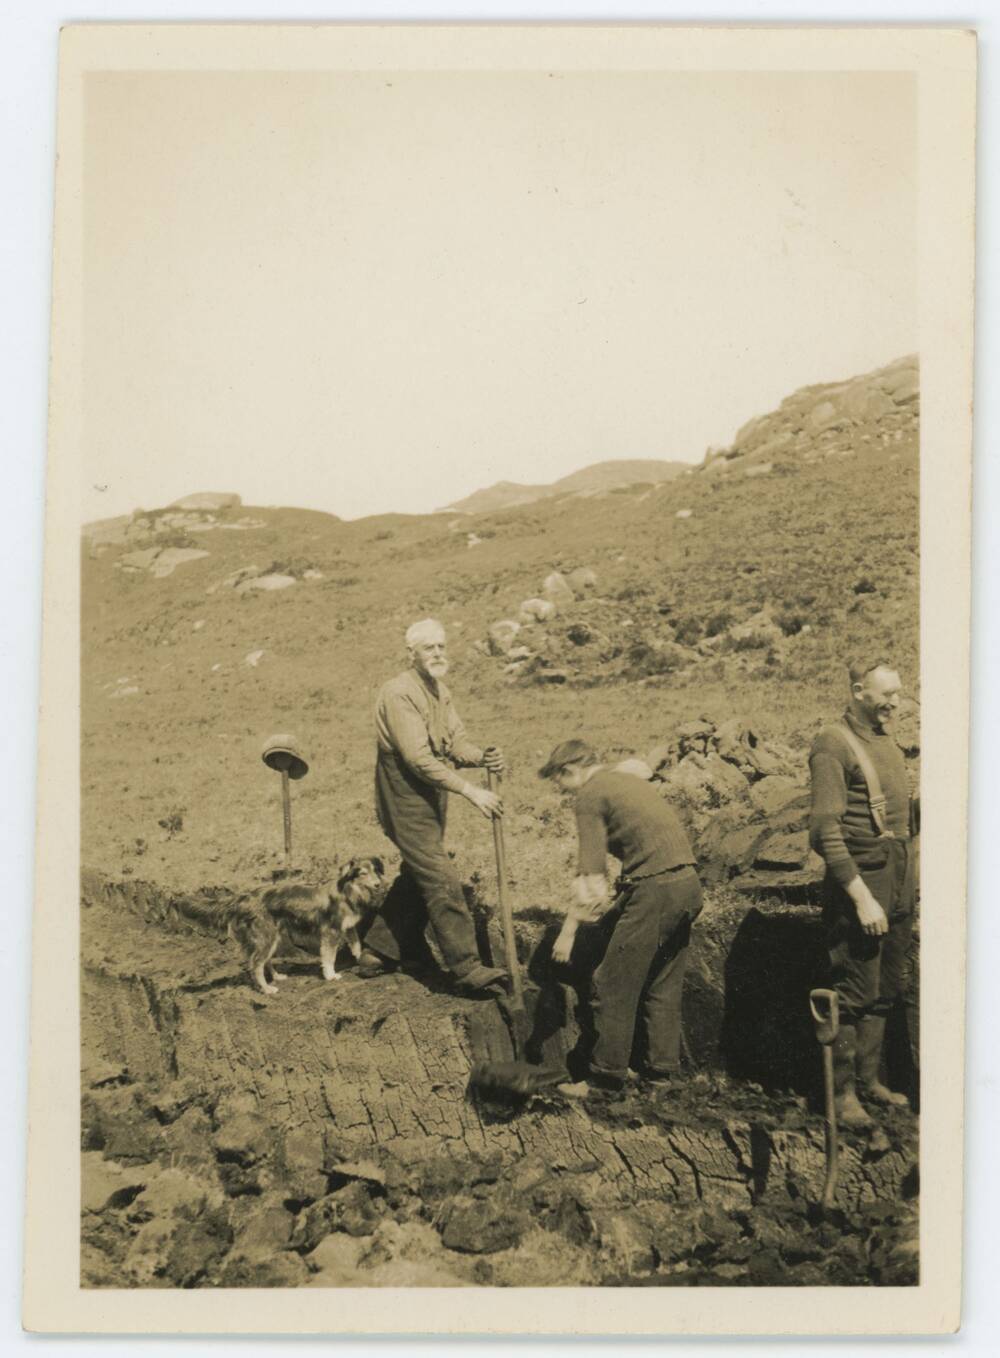 Black and white photograph of men cutting peat in a landscape.